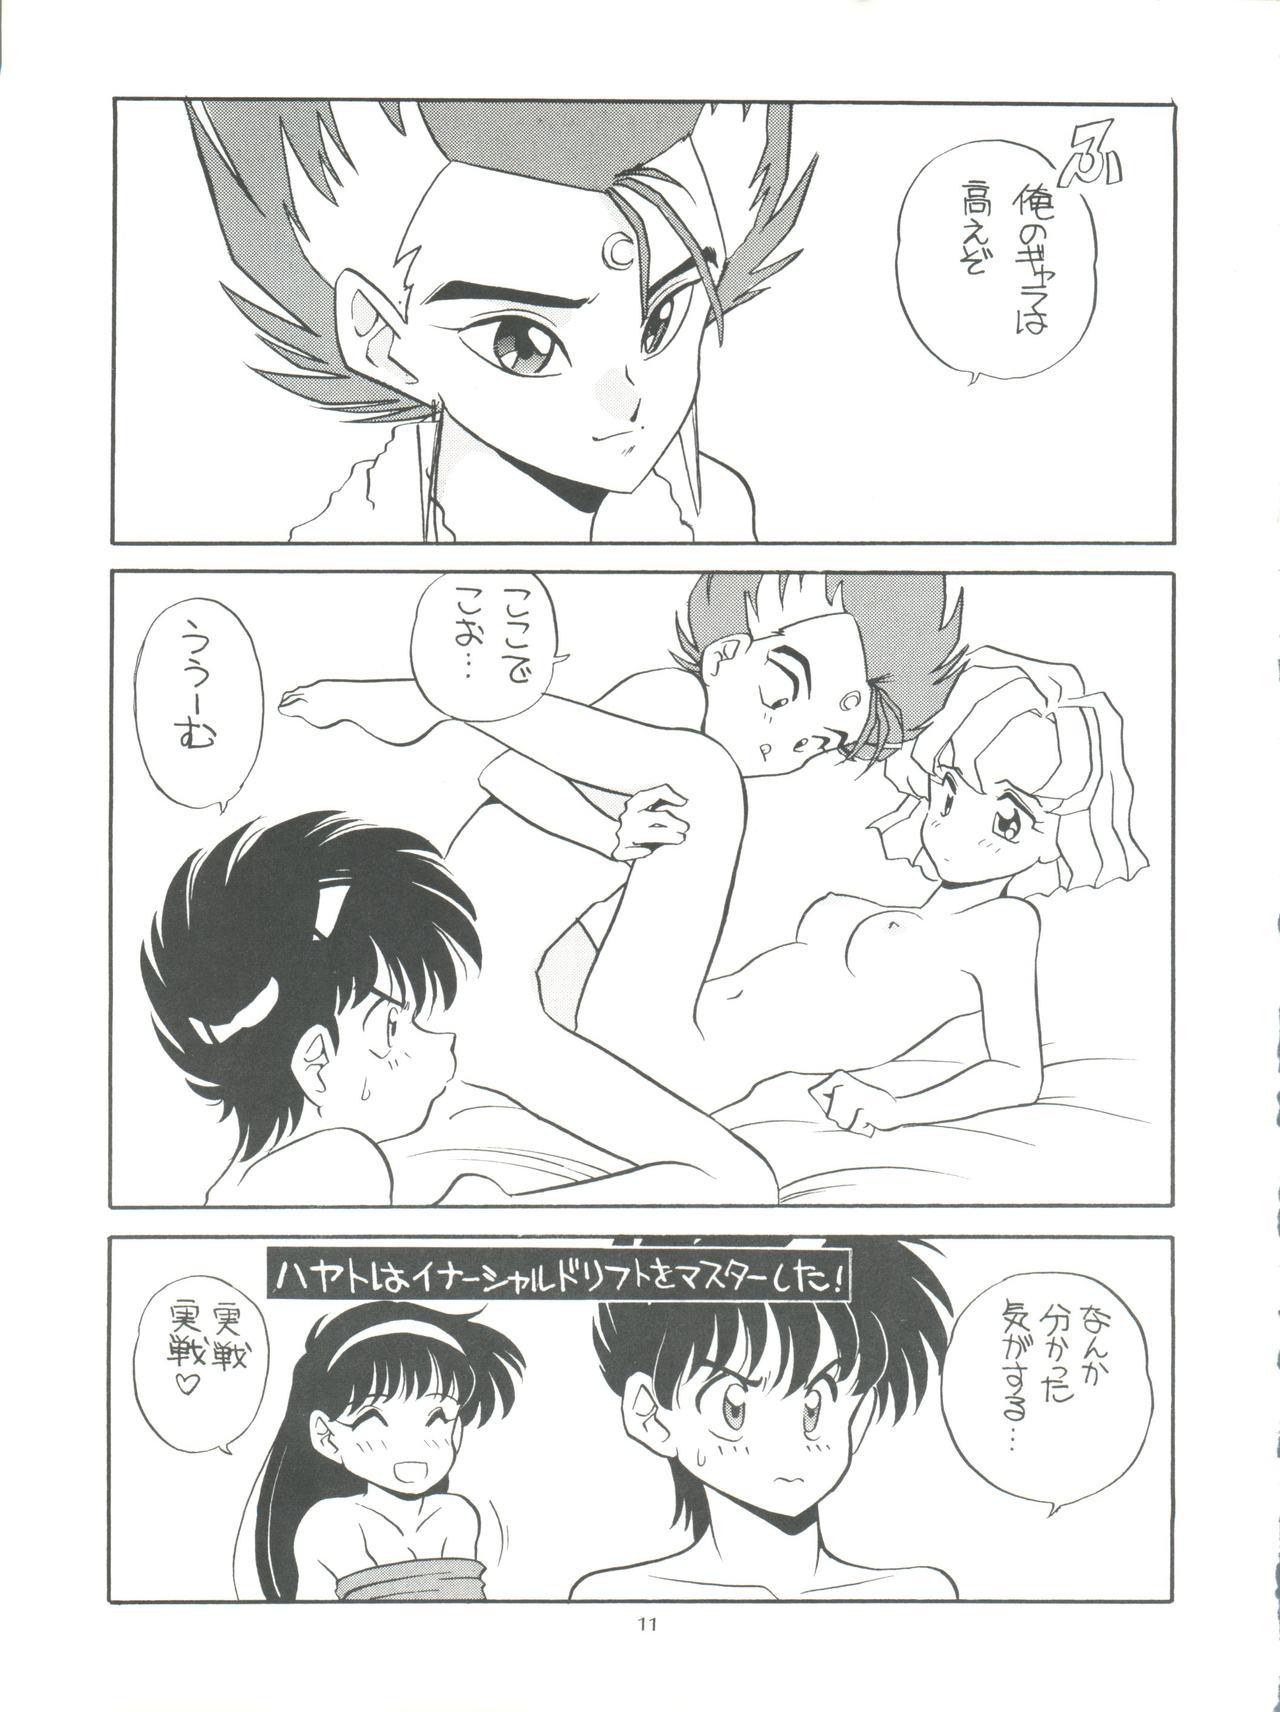 Office Fuck Amamori 3 - Brave express might gaine Future gpx cyber formula All purpose cultural cat girl nuku nuku Dom - Page 11